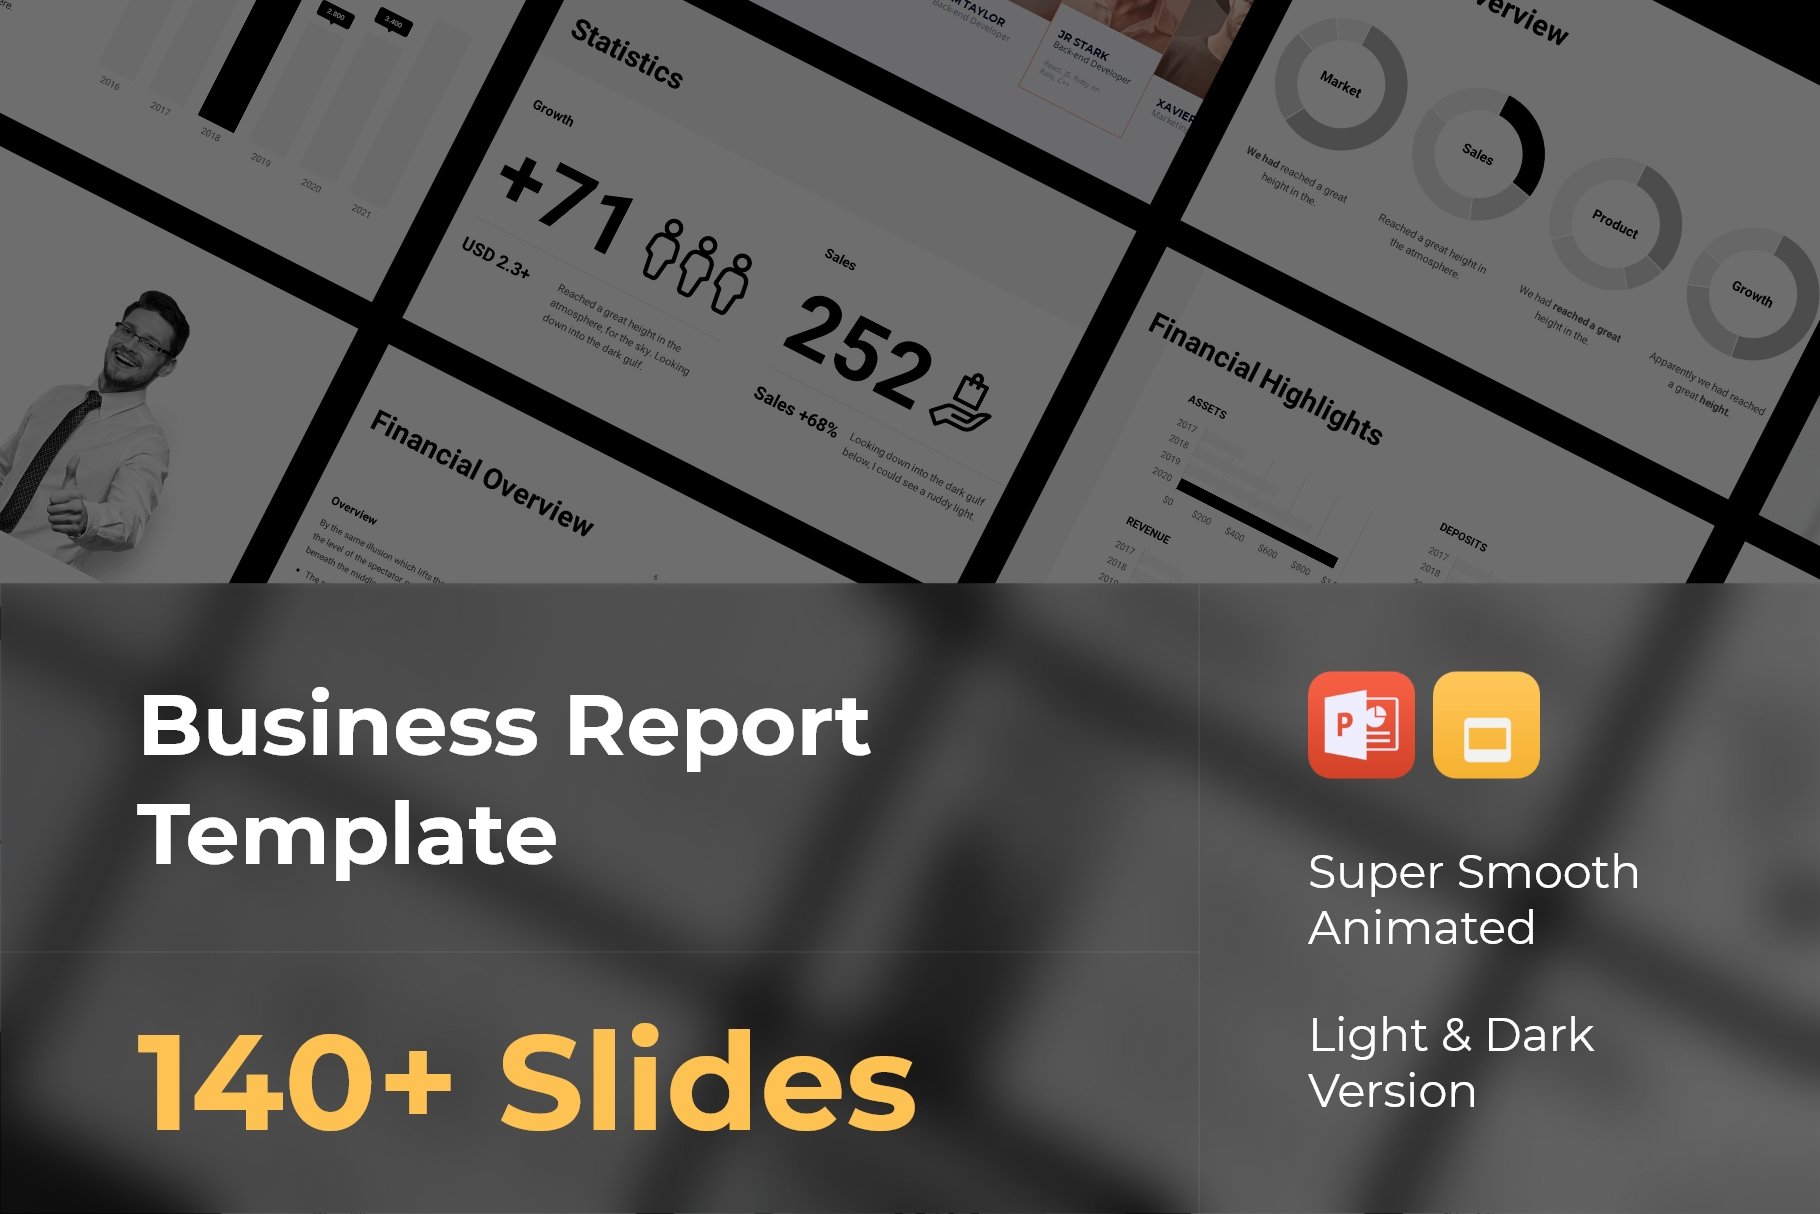 Business report template.